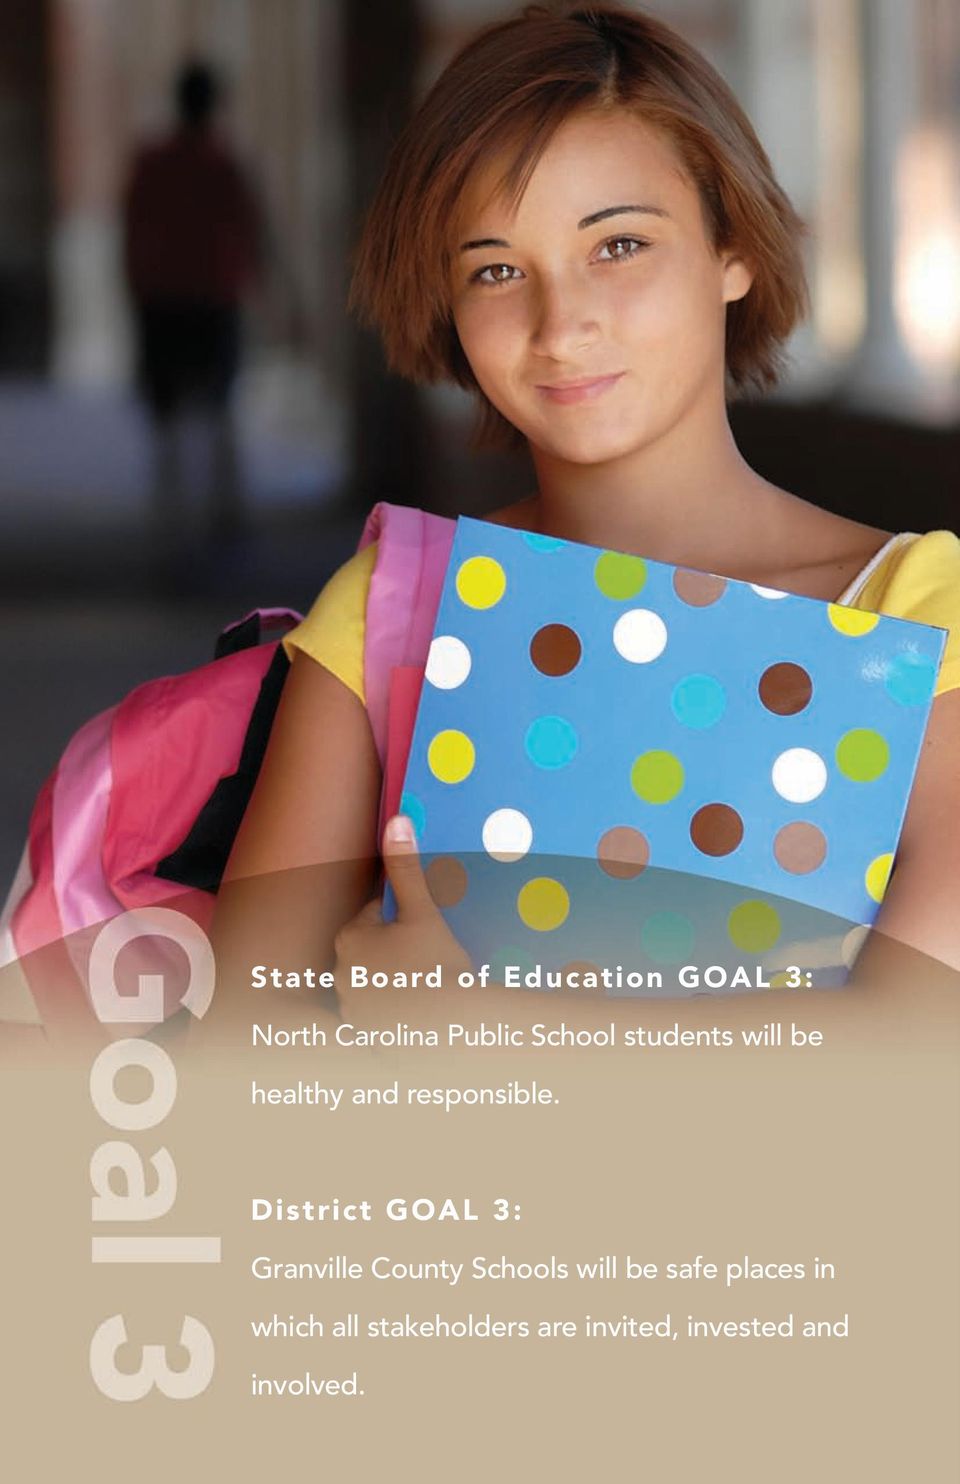 District GOAL 3: Granville County Schools will be safe